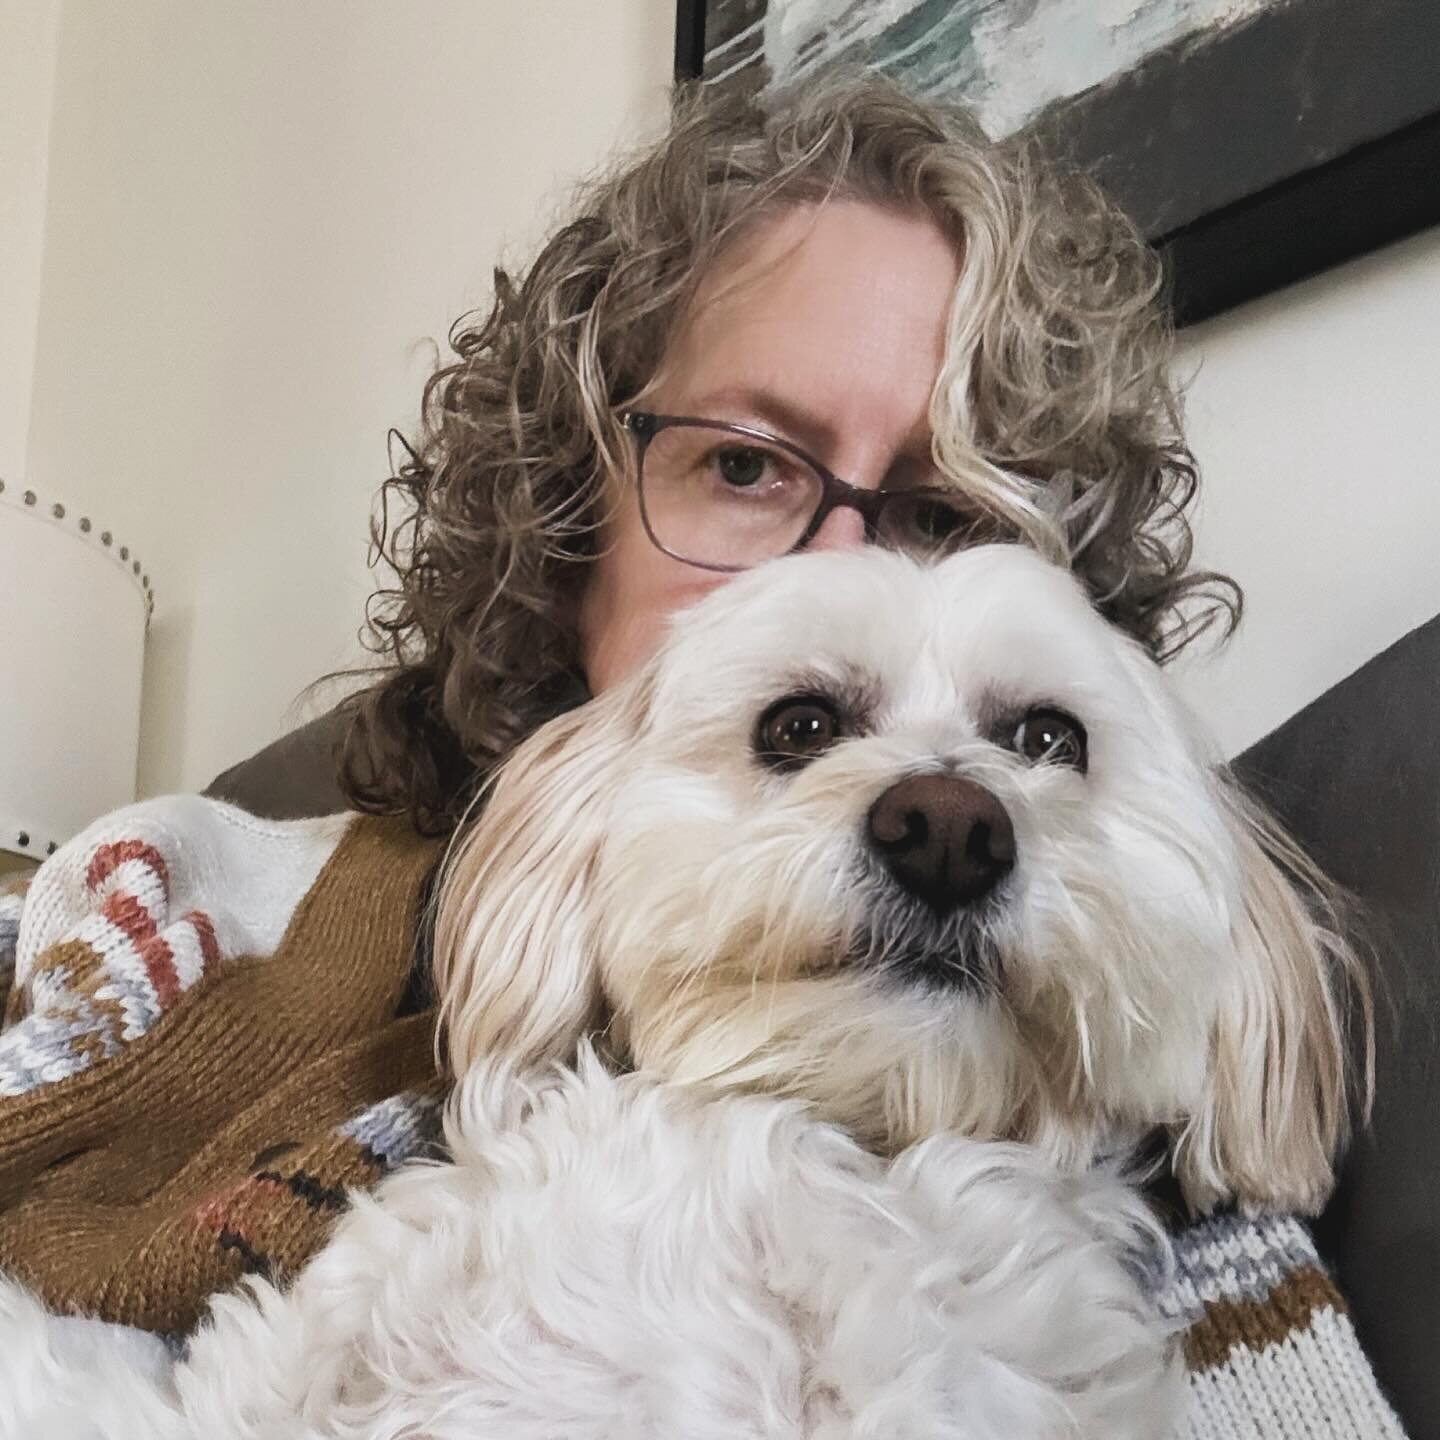 Is it wrong to take selfies with your dog during an all-day Zoom meeting? #askingforafriend